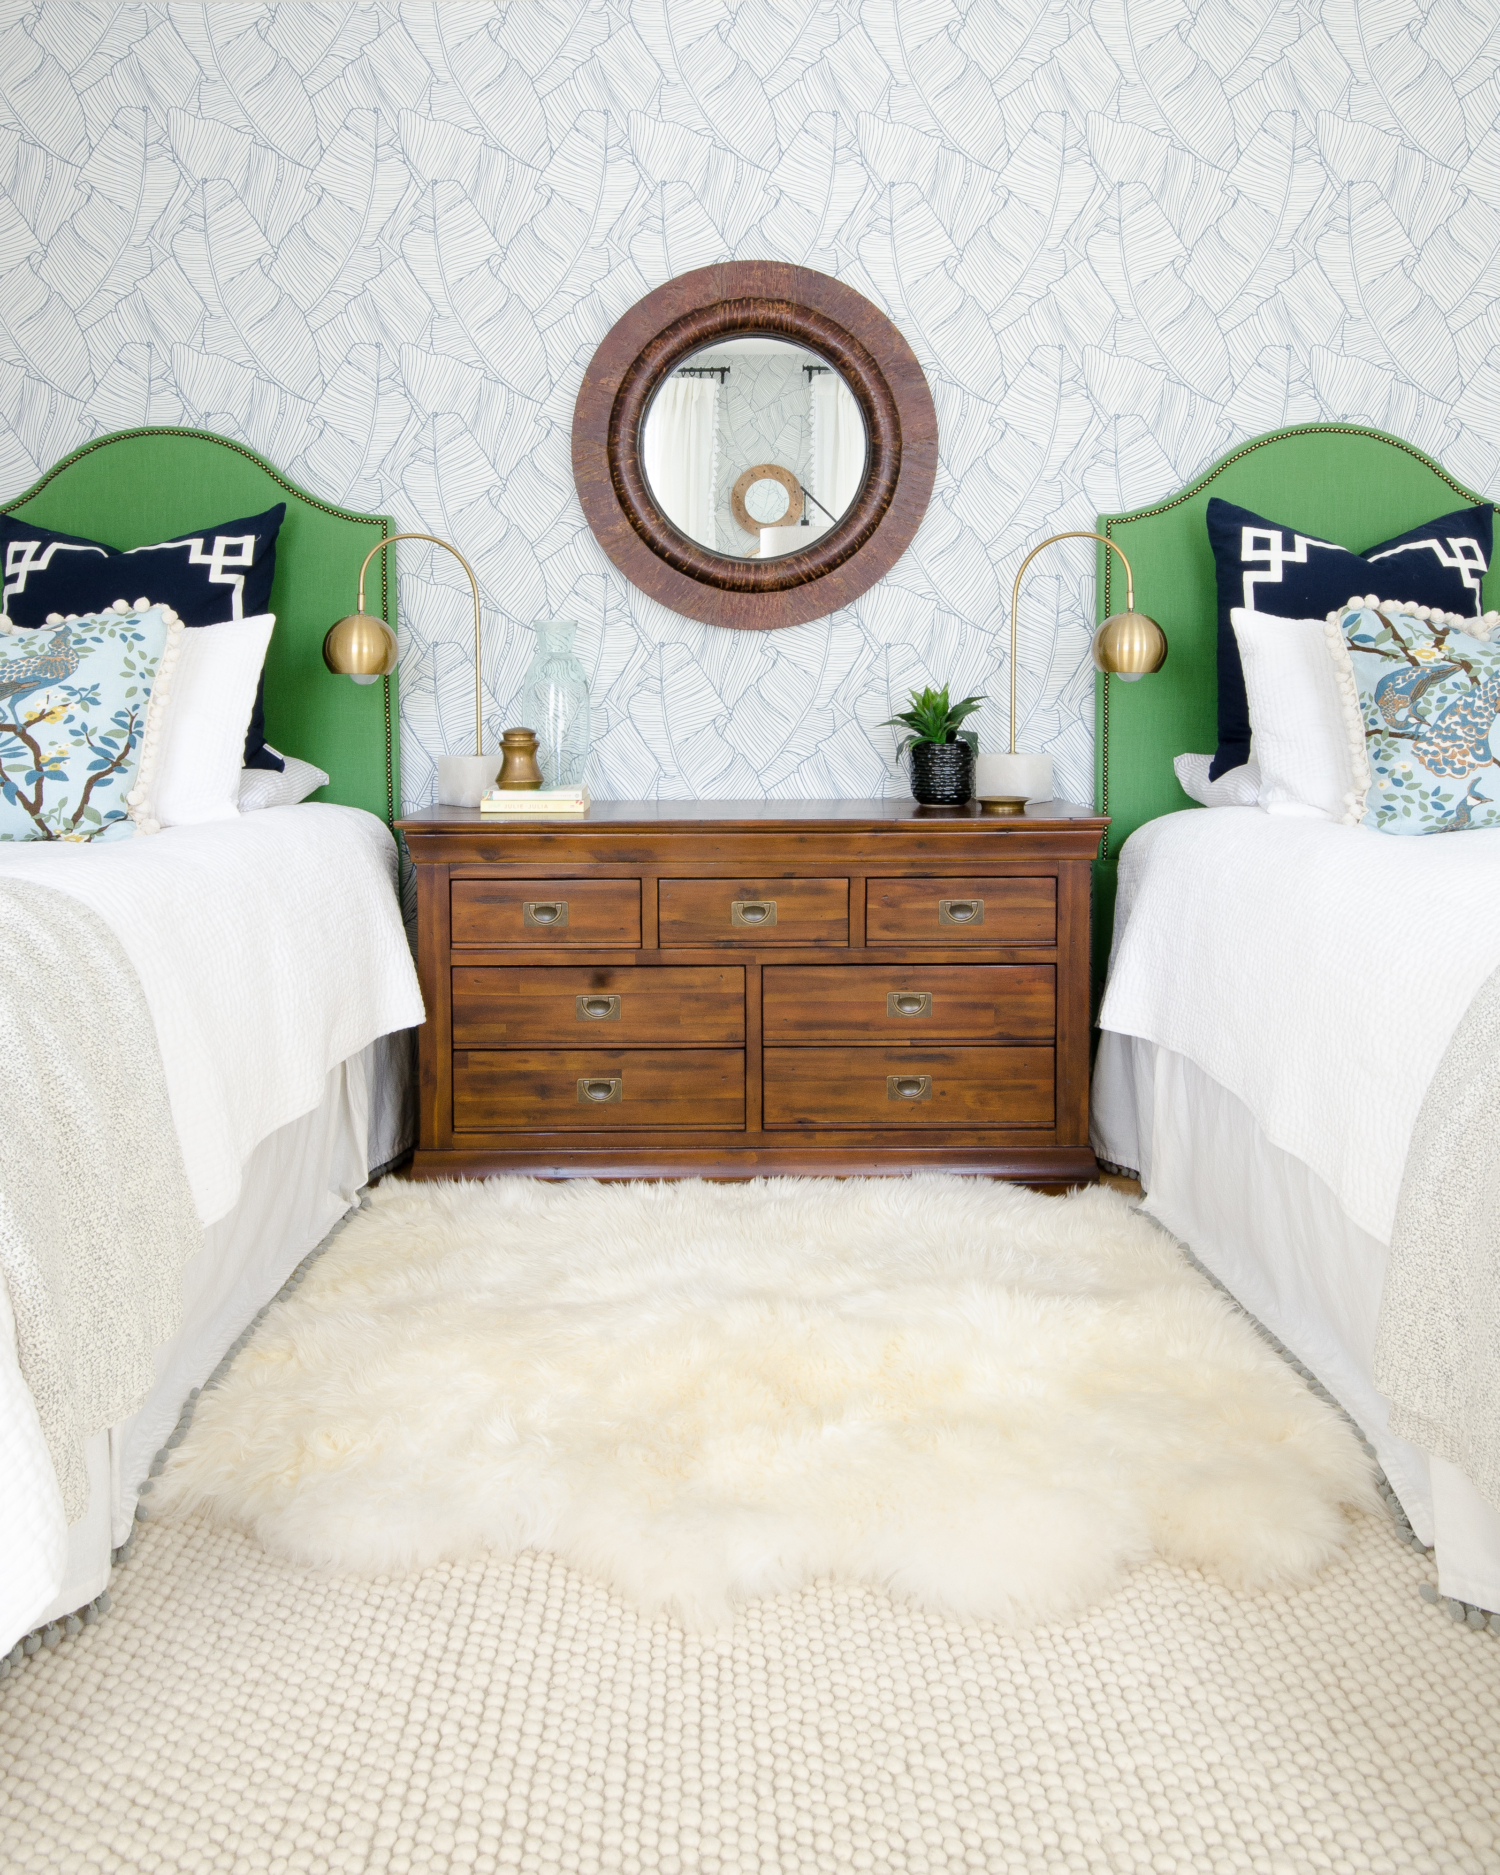 A traditional blue, green, and white bedroom with modern touches. Shows how to create a simple, pretty, and comfortable guest room on a budget!